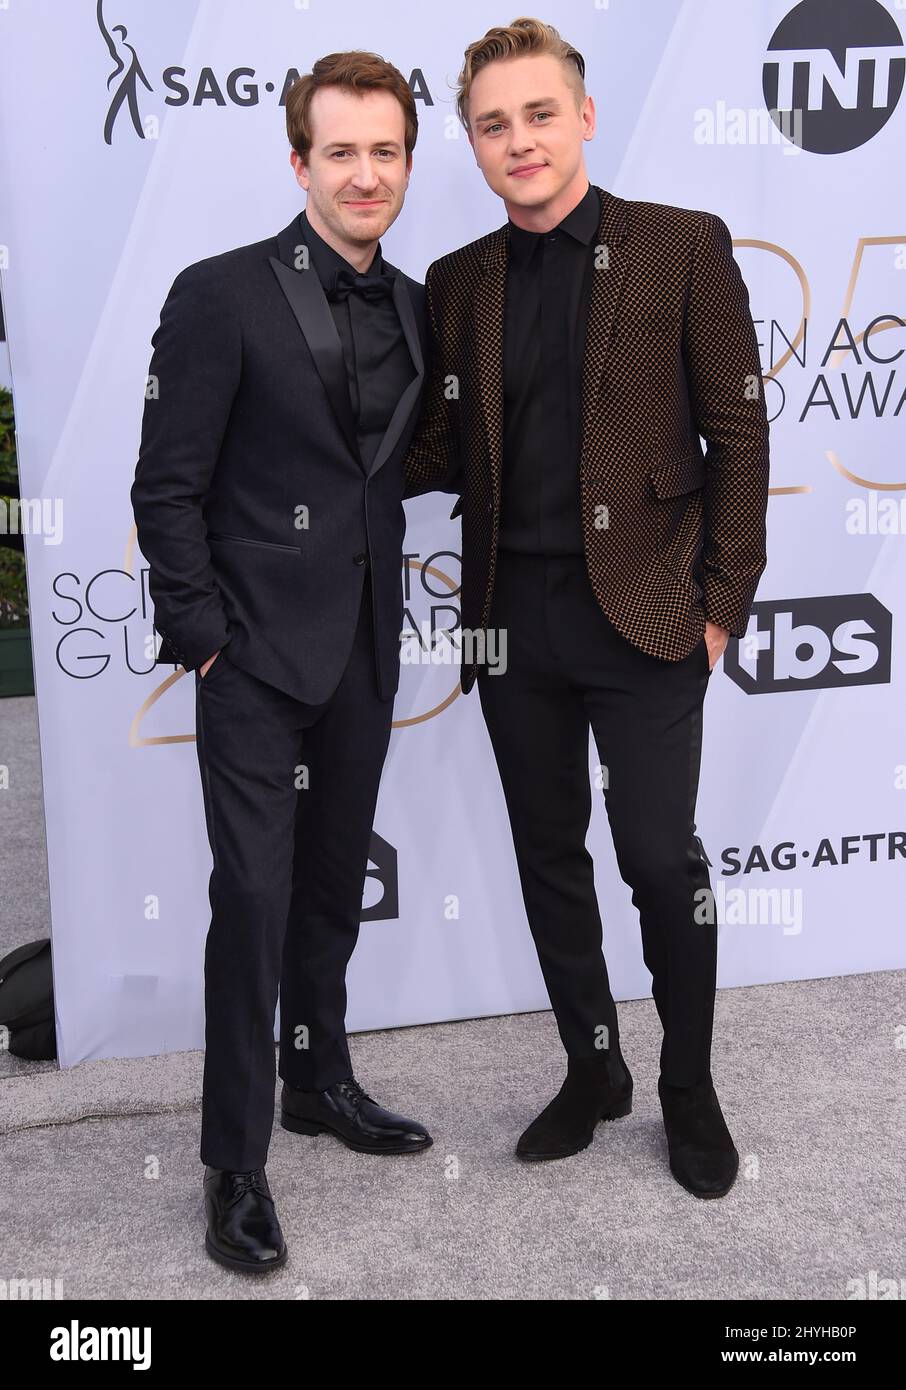 Joseph Mazzello and Ben Hardy attending the 25th Annual Screen Actors Guild Awards held at the Shrine Auditorium Stock Photo